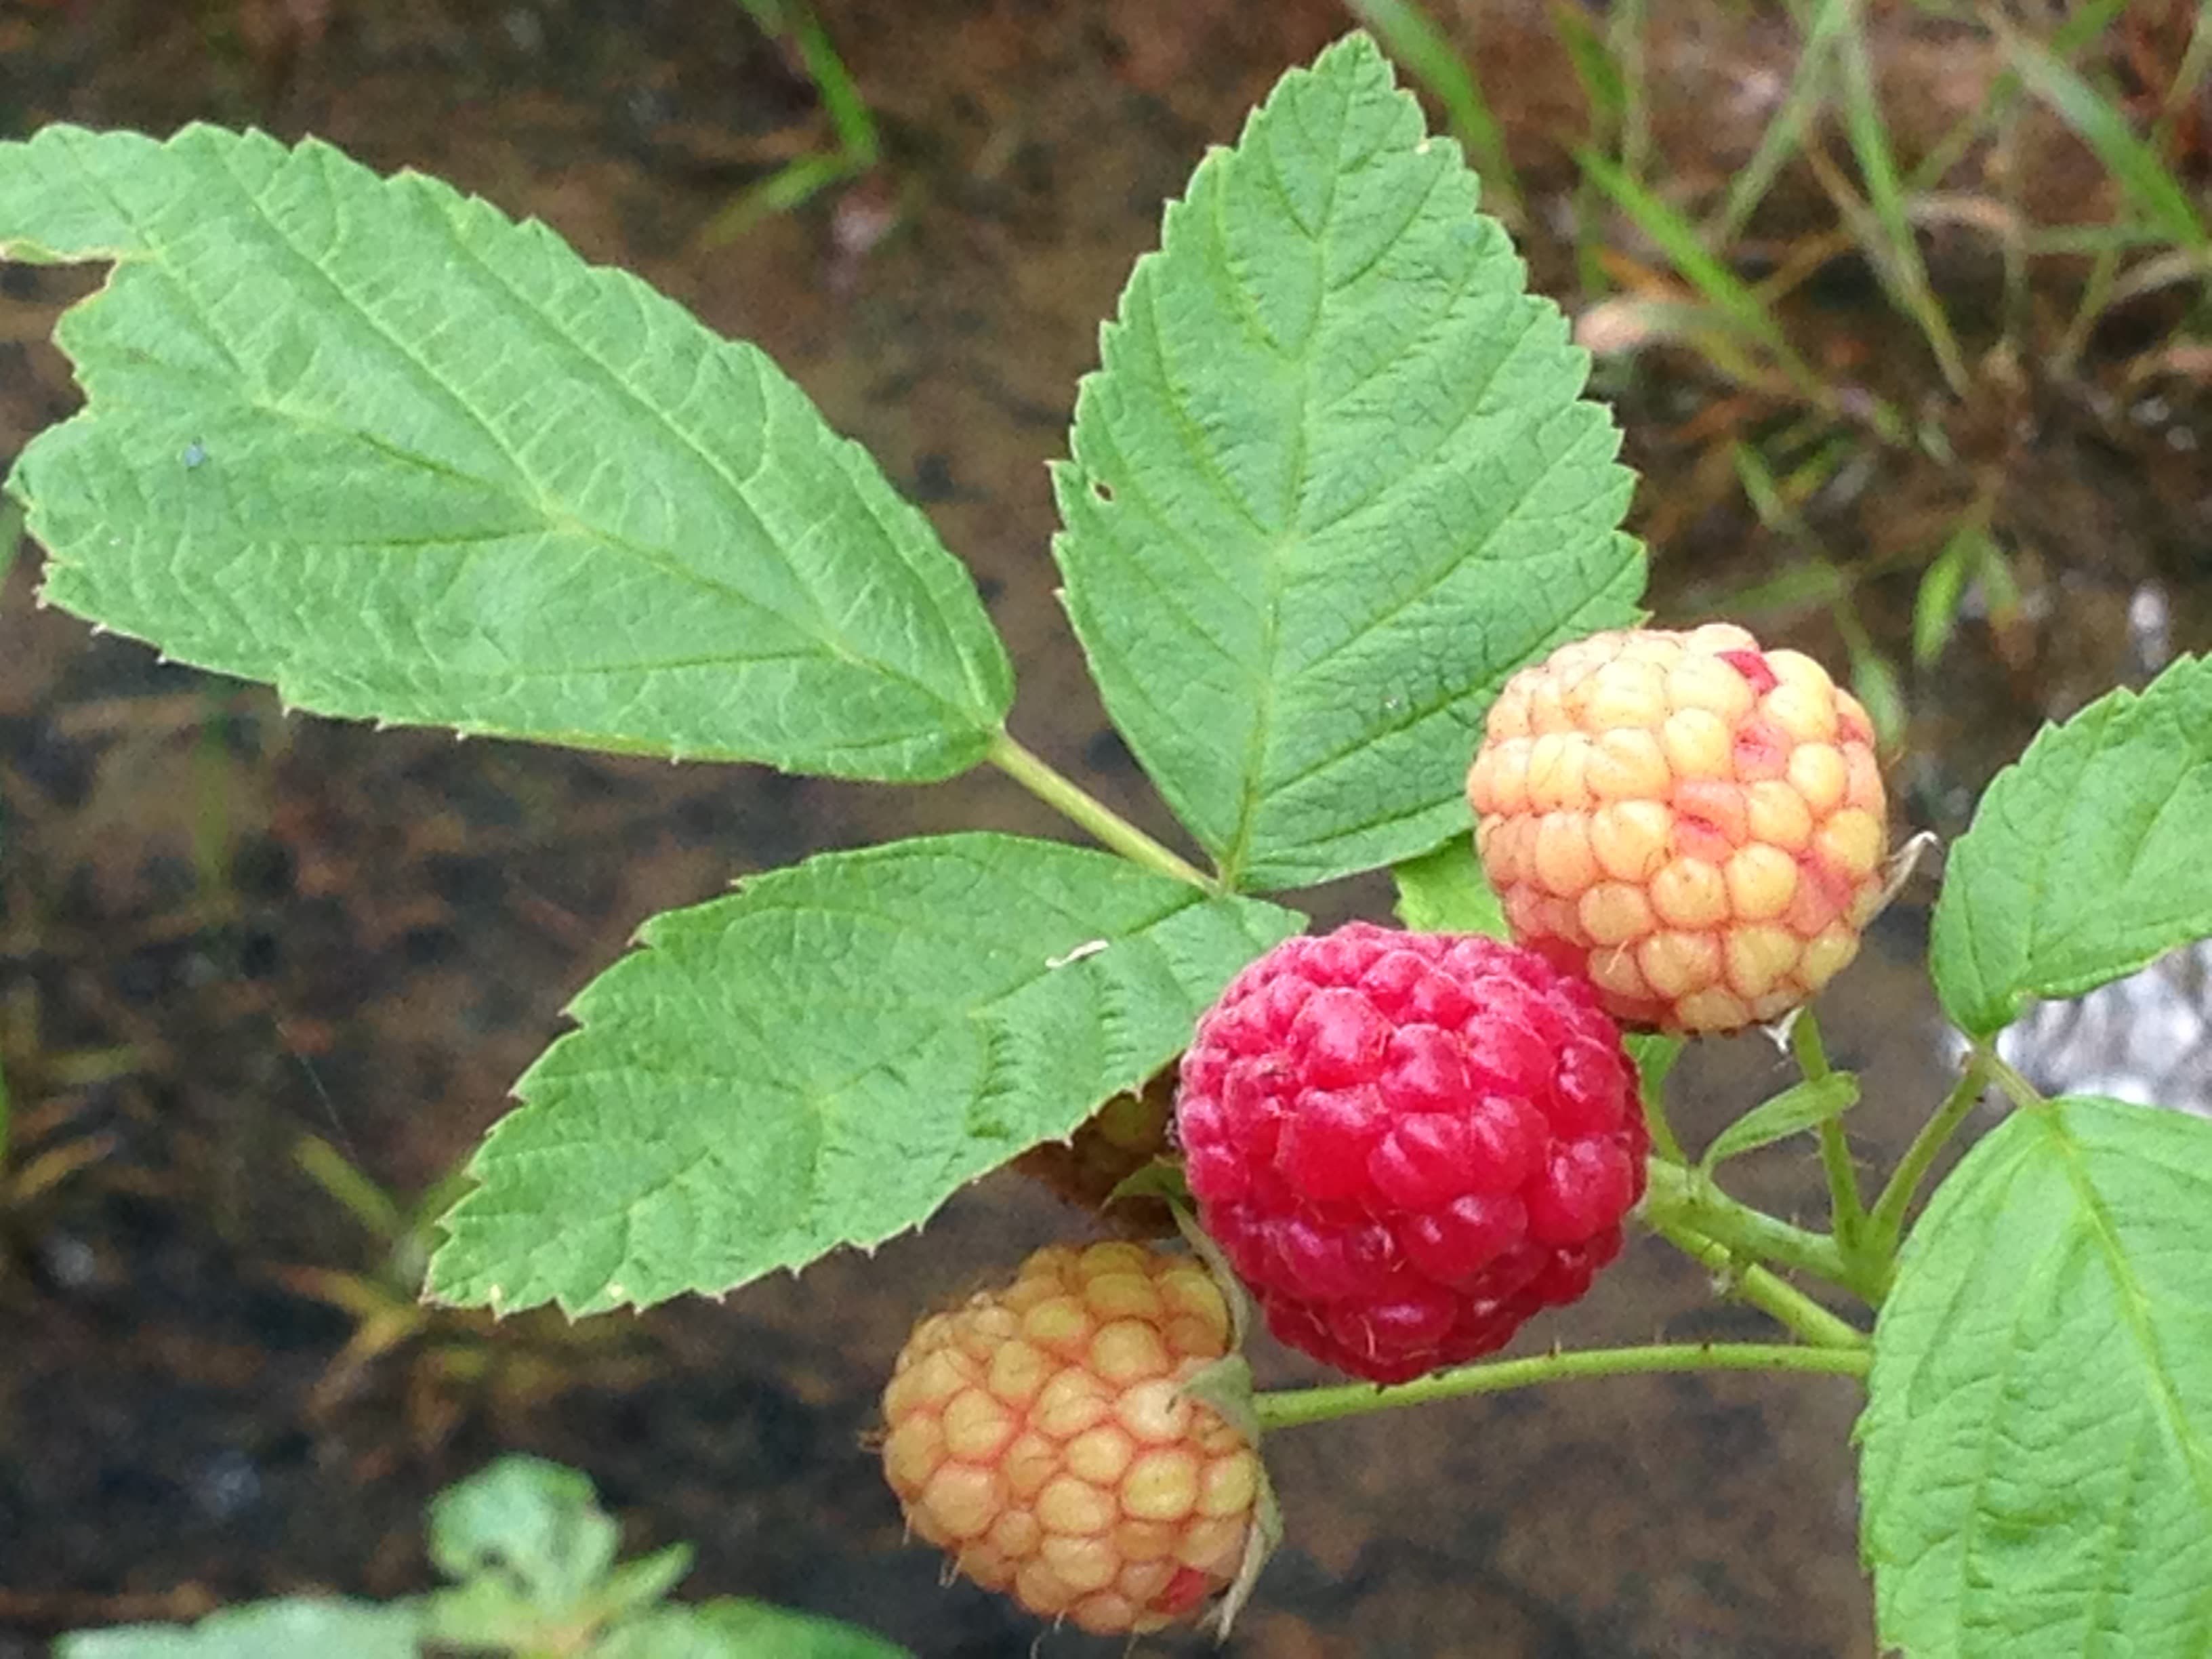 Image of three raspberries clinging to the plant. one is bright red while the other two are light pink.